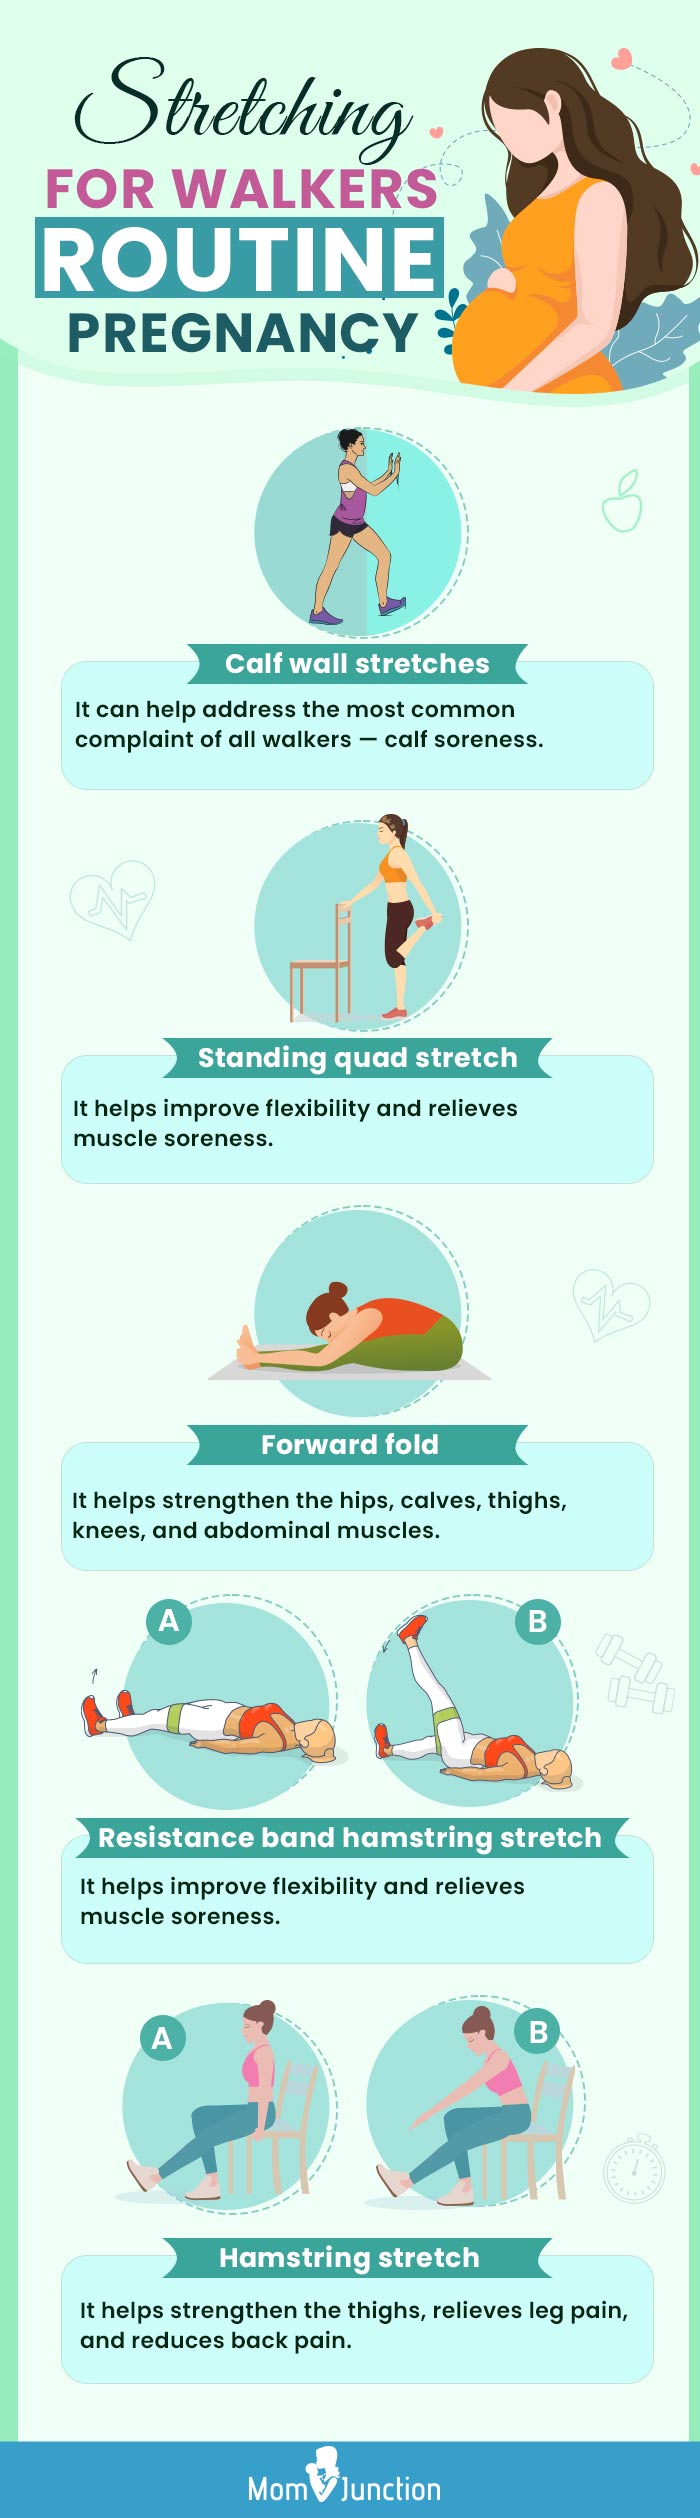 stretching routine for walkers during pregnancy (infographic)